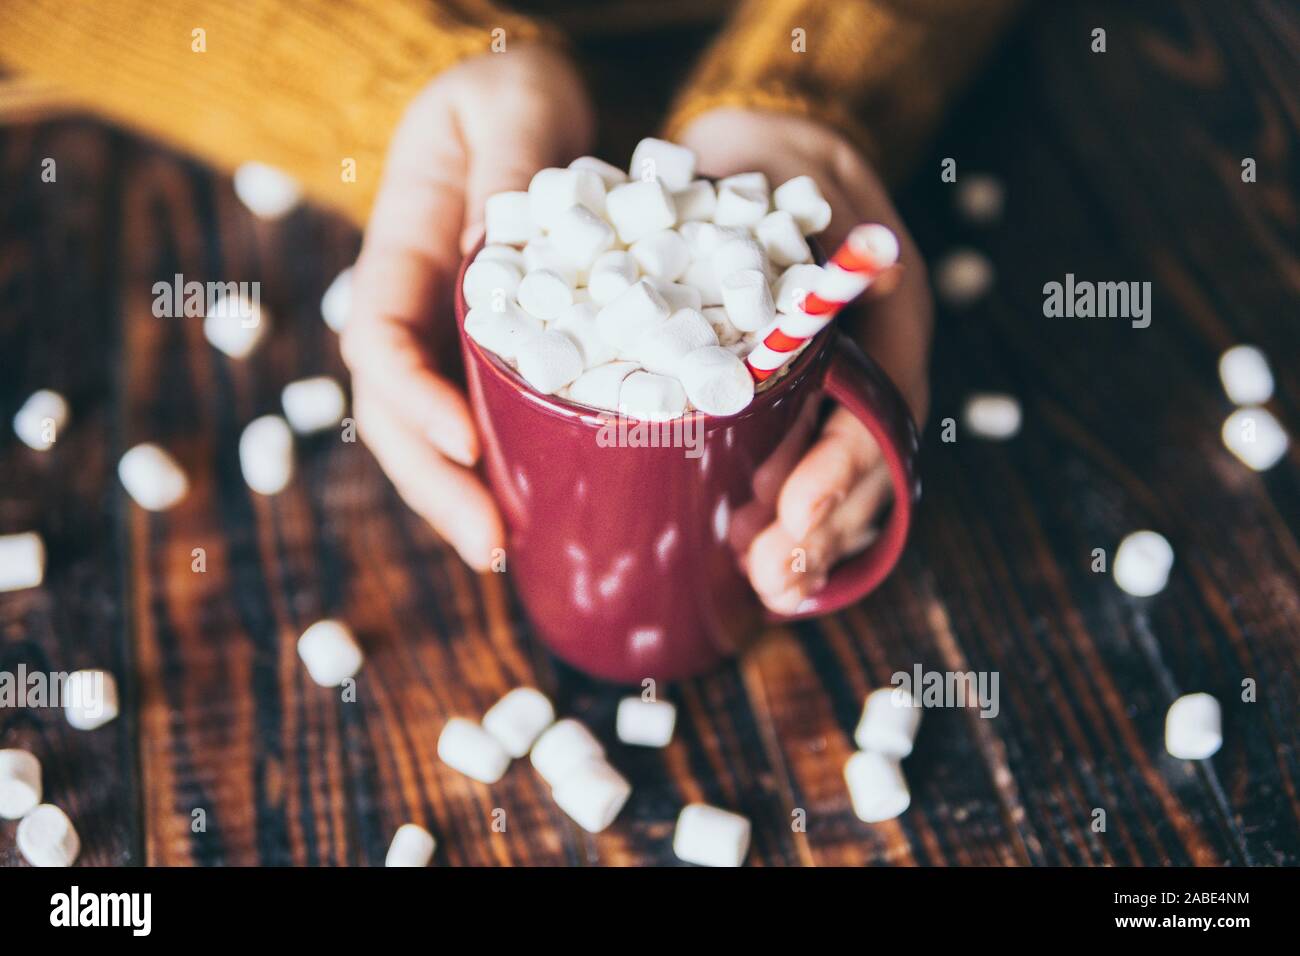 Woman in yellow sweater holding hot chocolate mug covered with marshmallow on dark wood background. Stock Photo